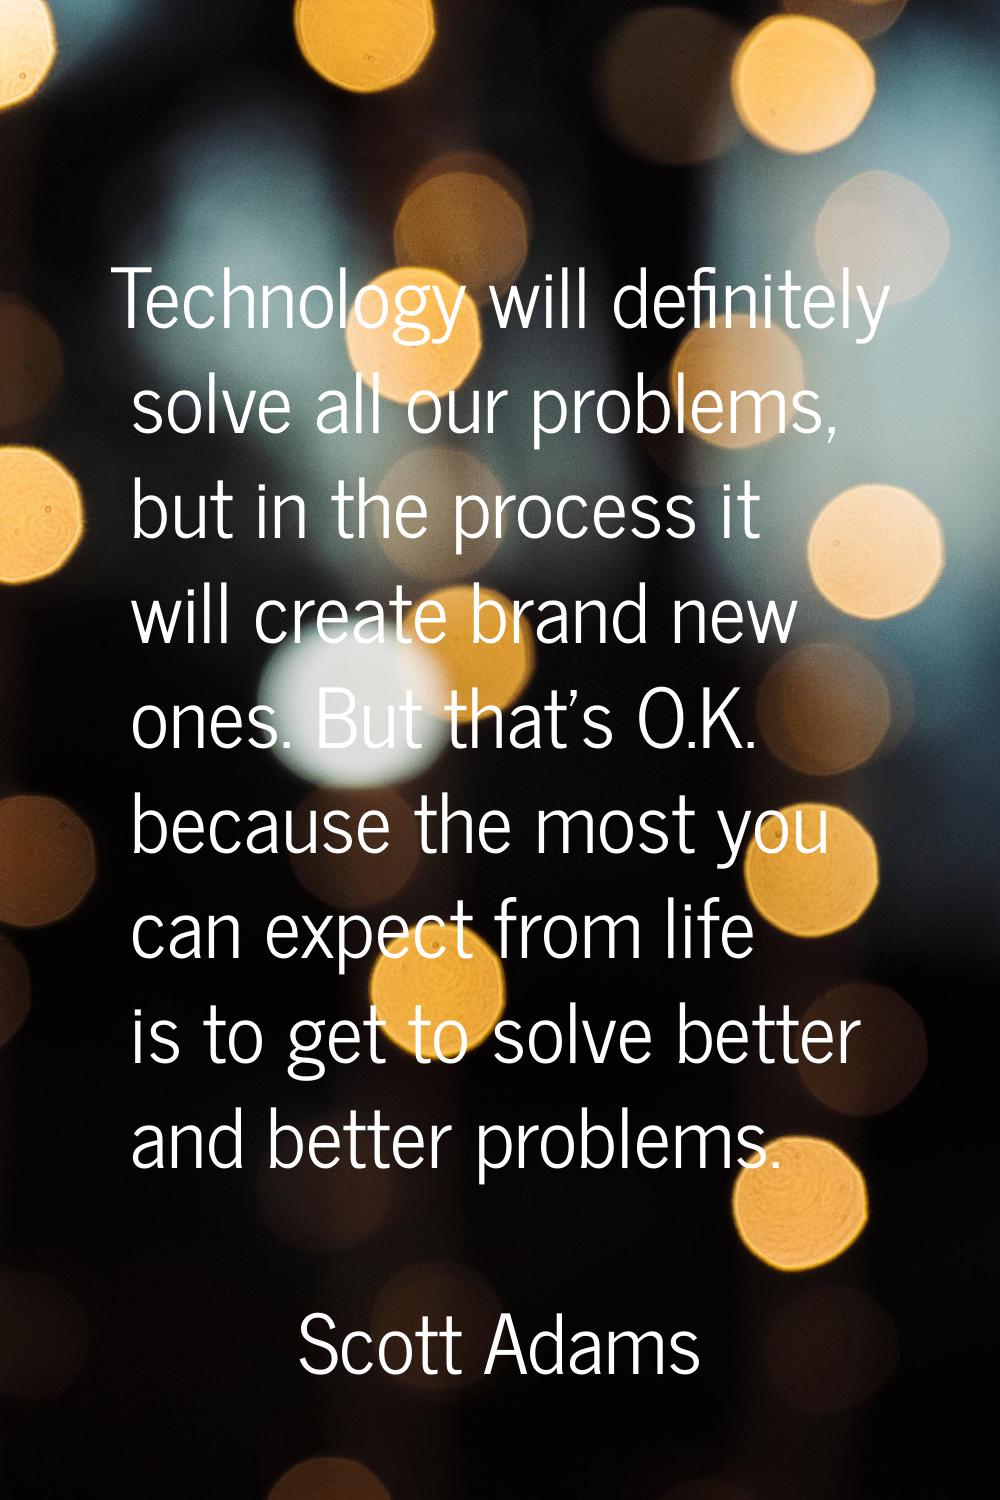 Technology will definitely solve all our problems, but in the process it will create brand new ones